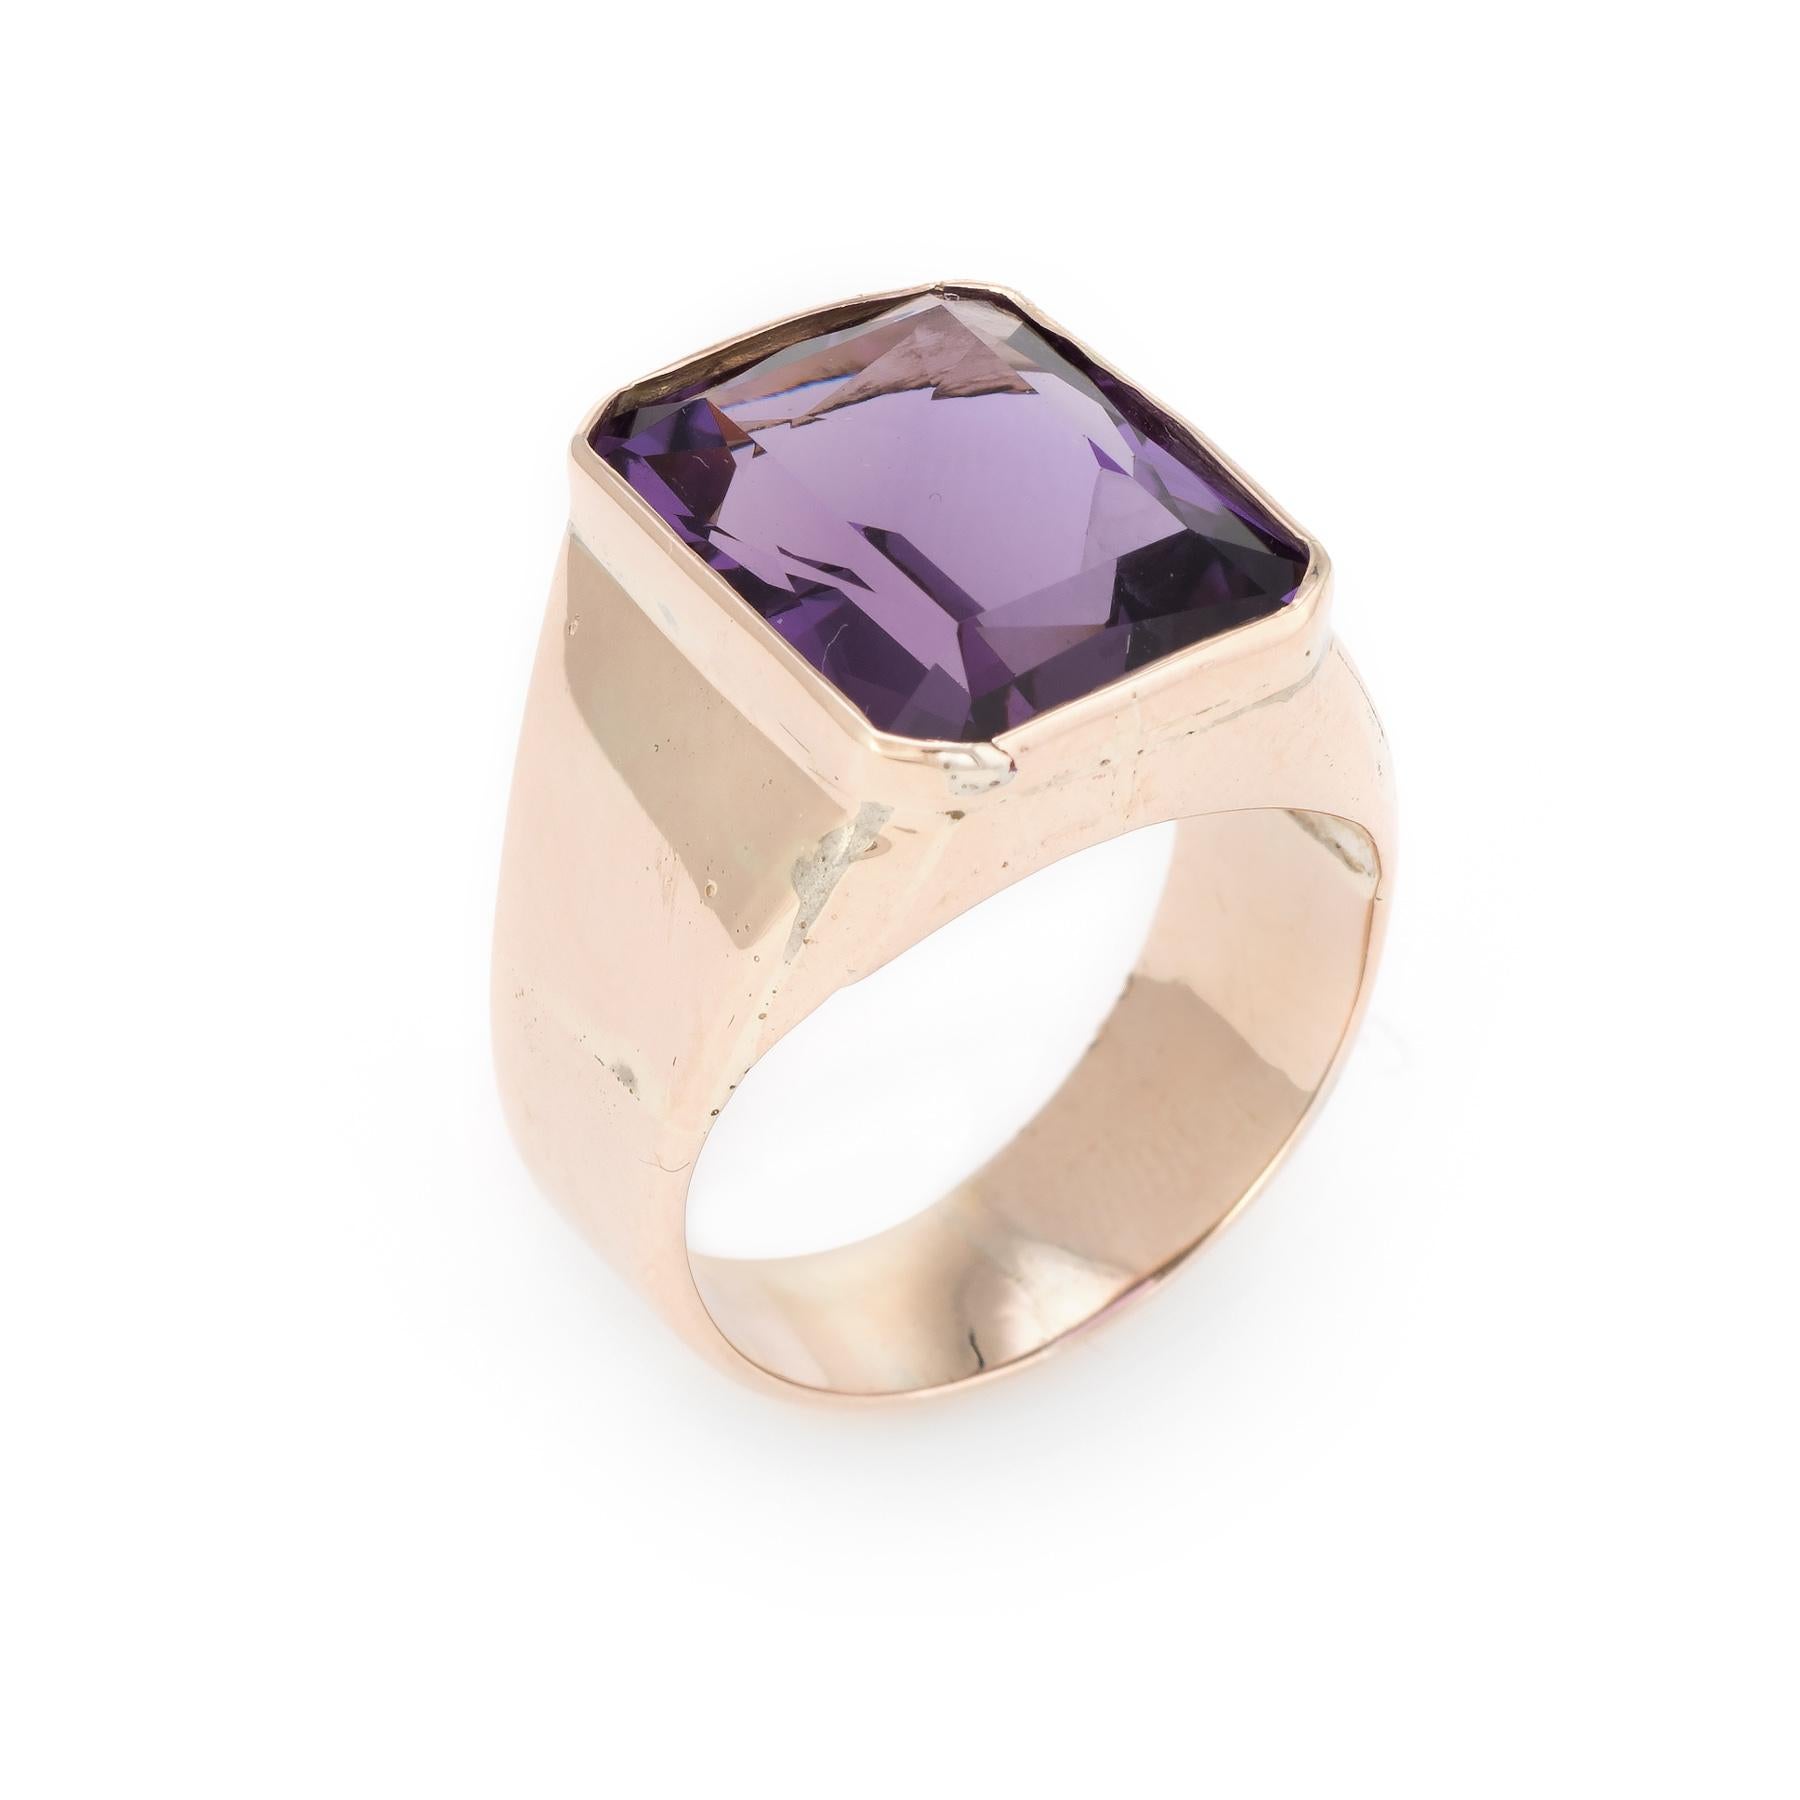 Finely detailed vintage men's cocktail ring (circa 1960s to 1970s), crafted in 10 karat yellow gold. 

Rich purple amethyst measures 15mm x 12mm (estimated at 12 carats). The amethyst is in excellent condition and free of cracks or chips. 

The